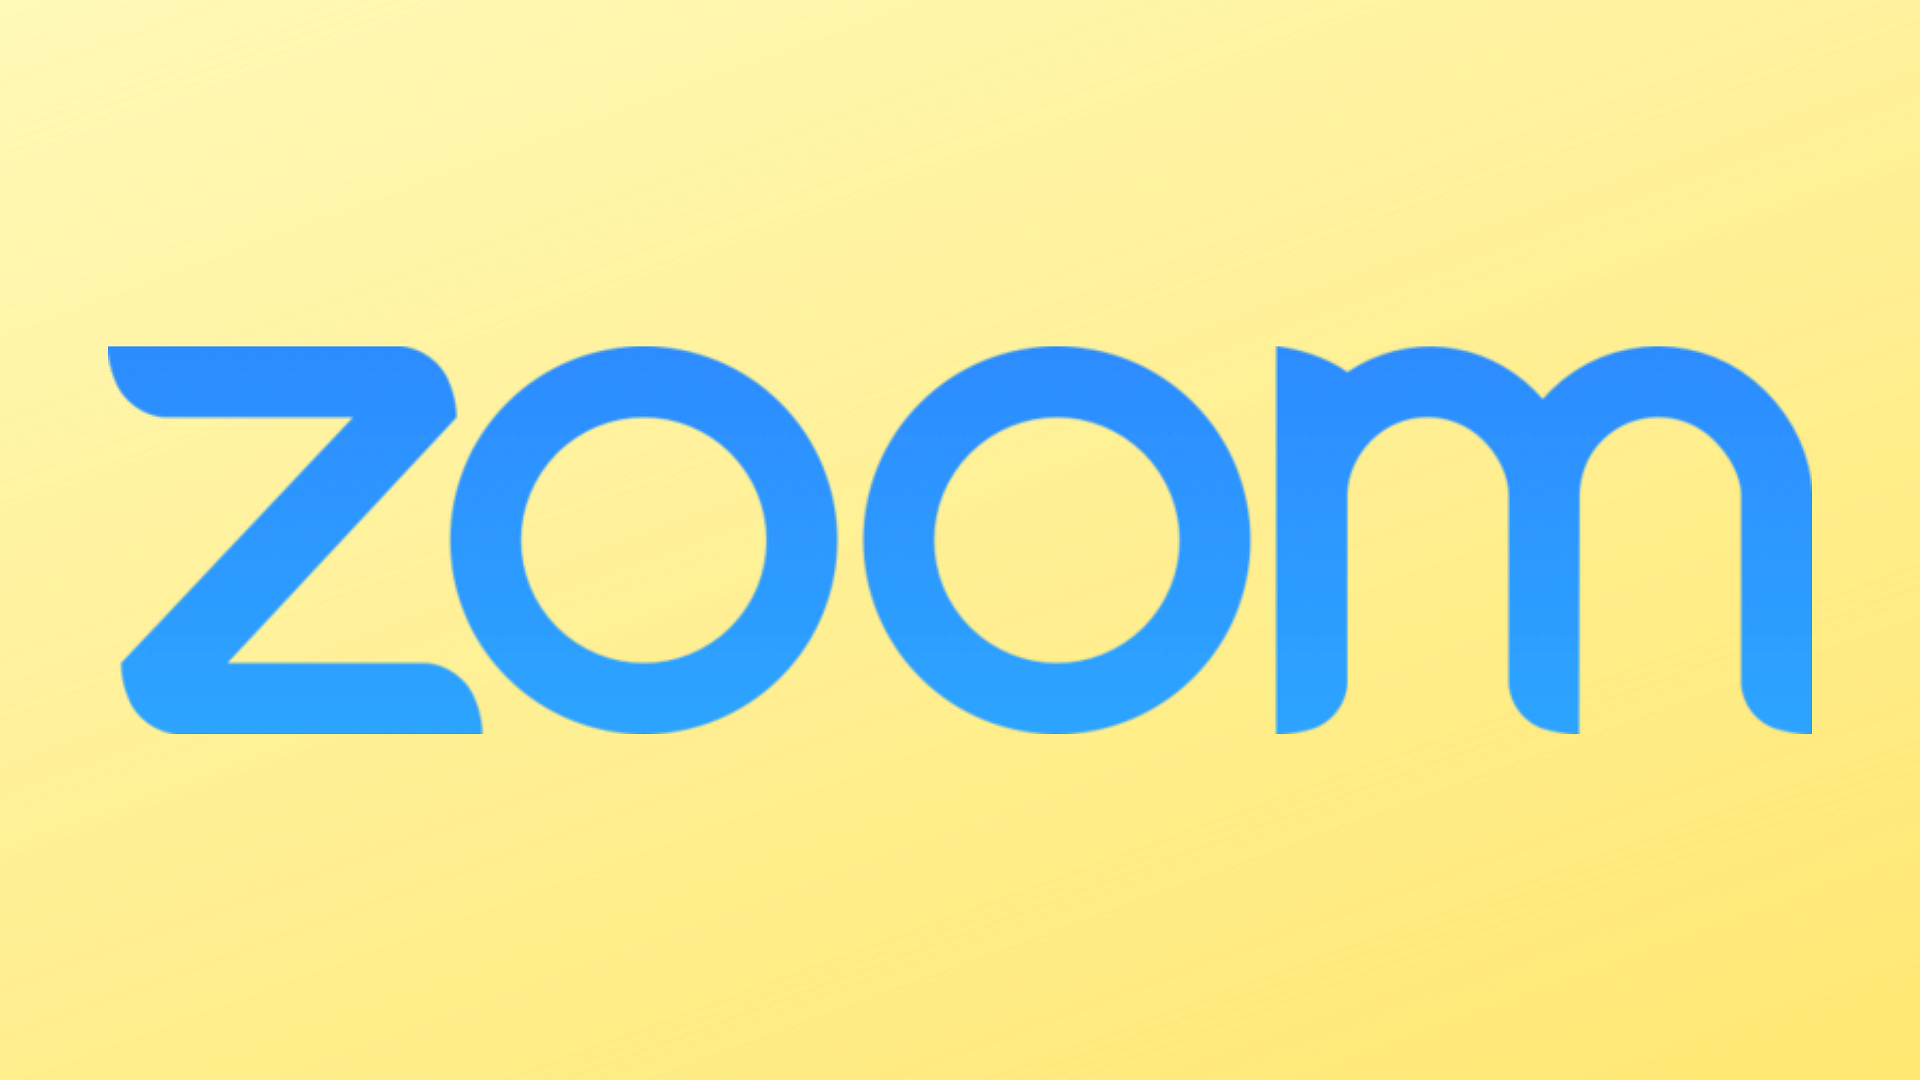 zoom video chat app download for pc